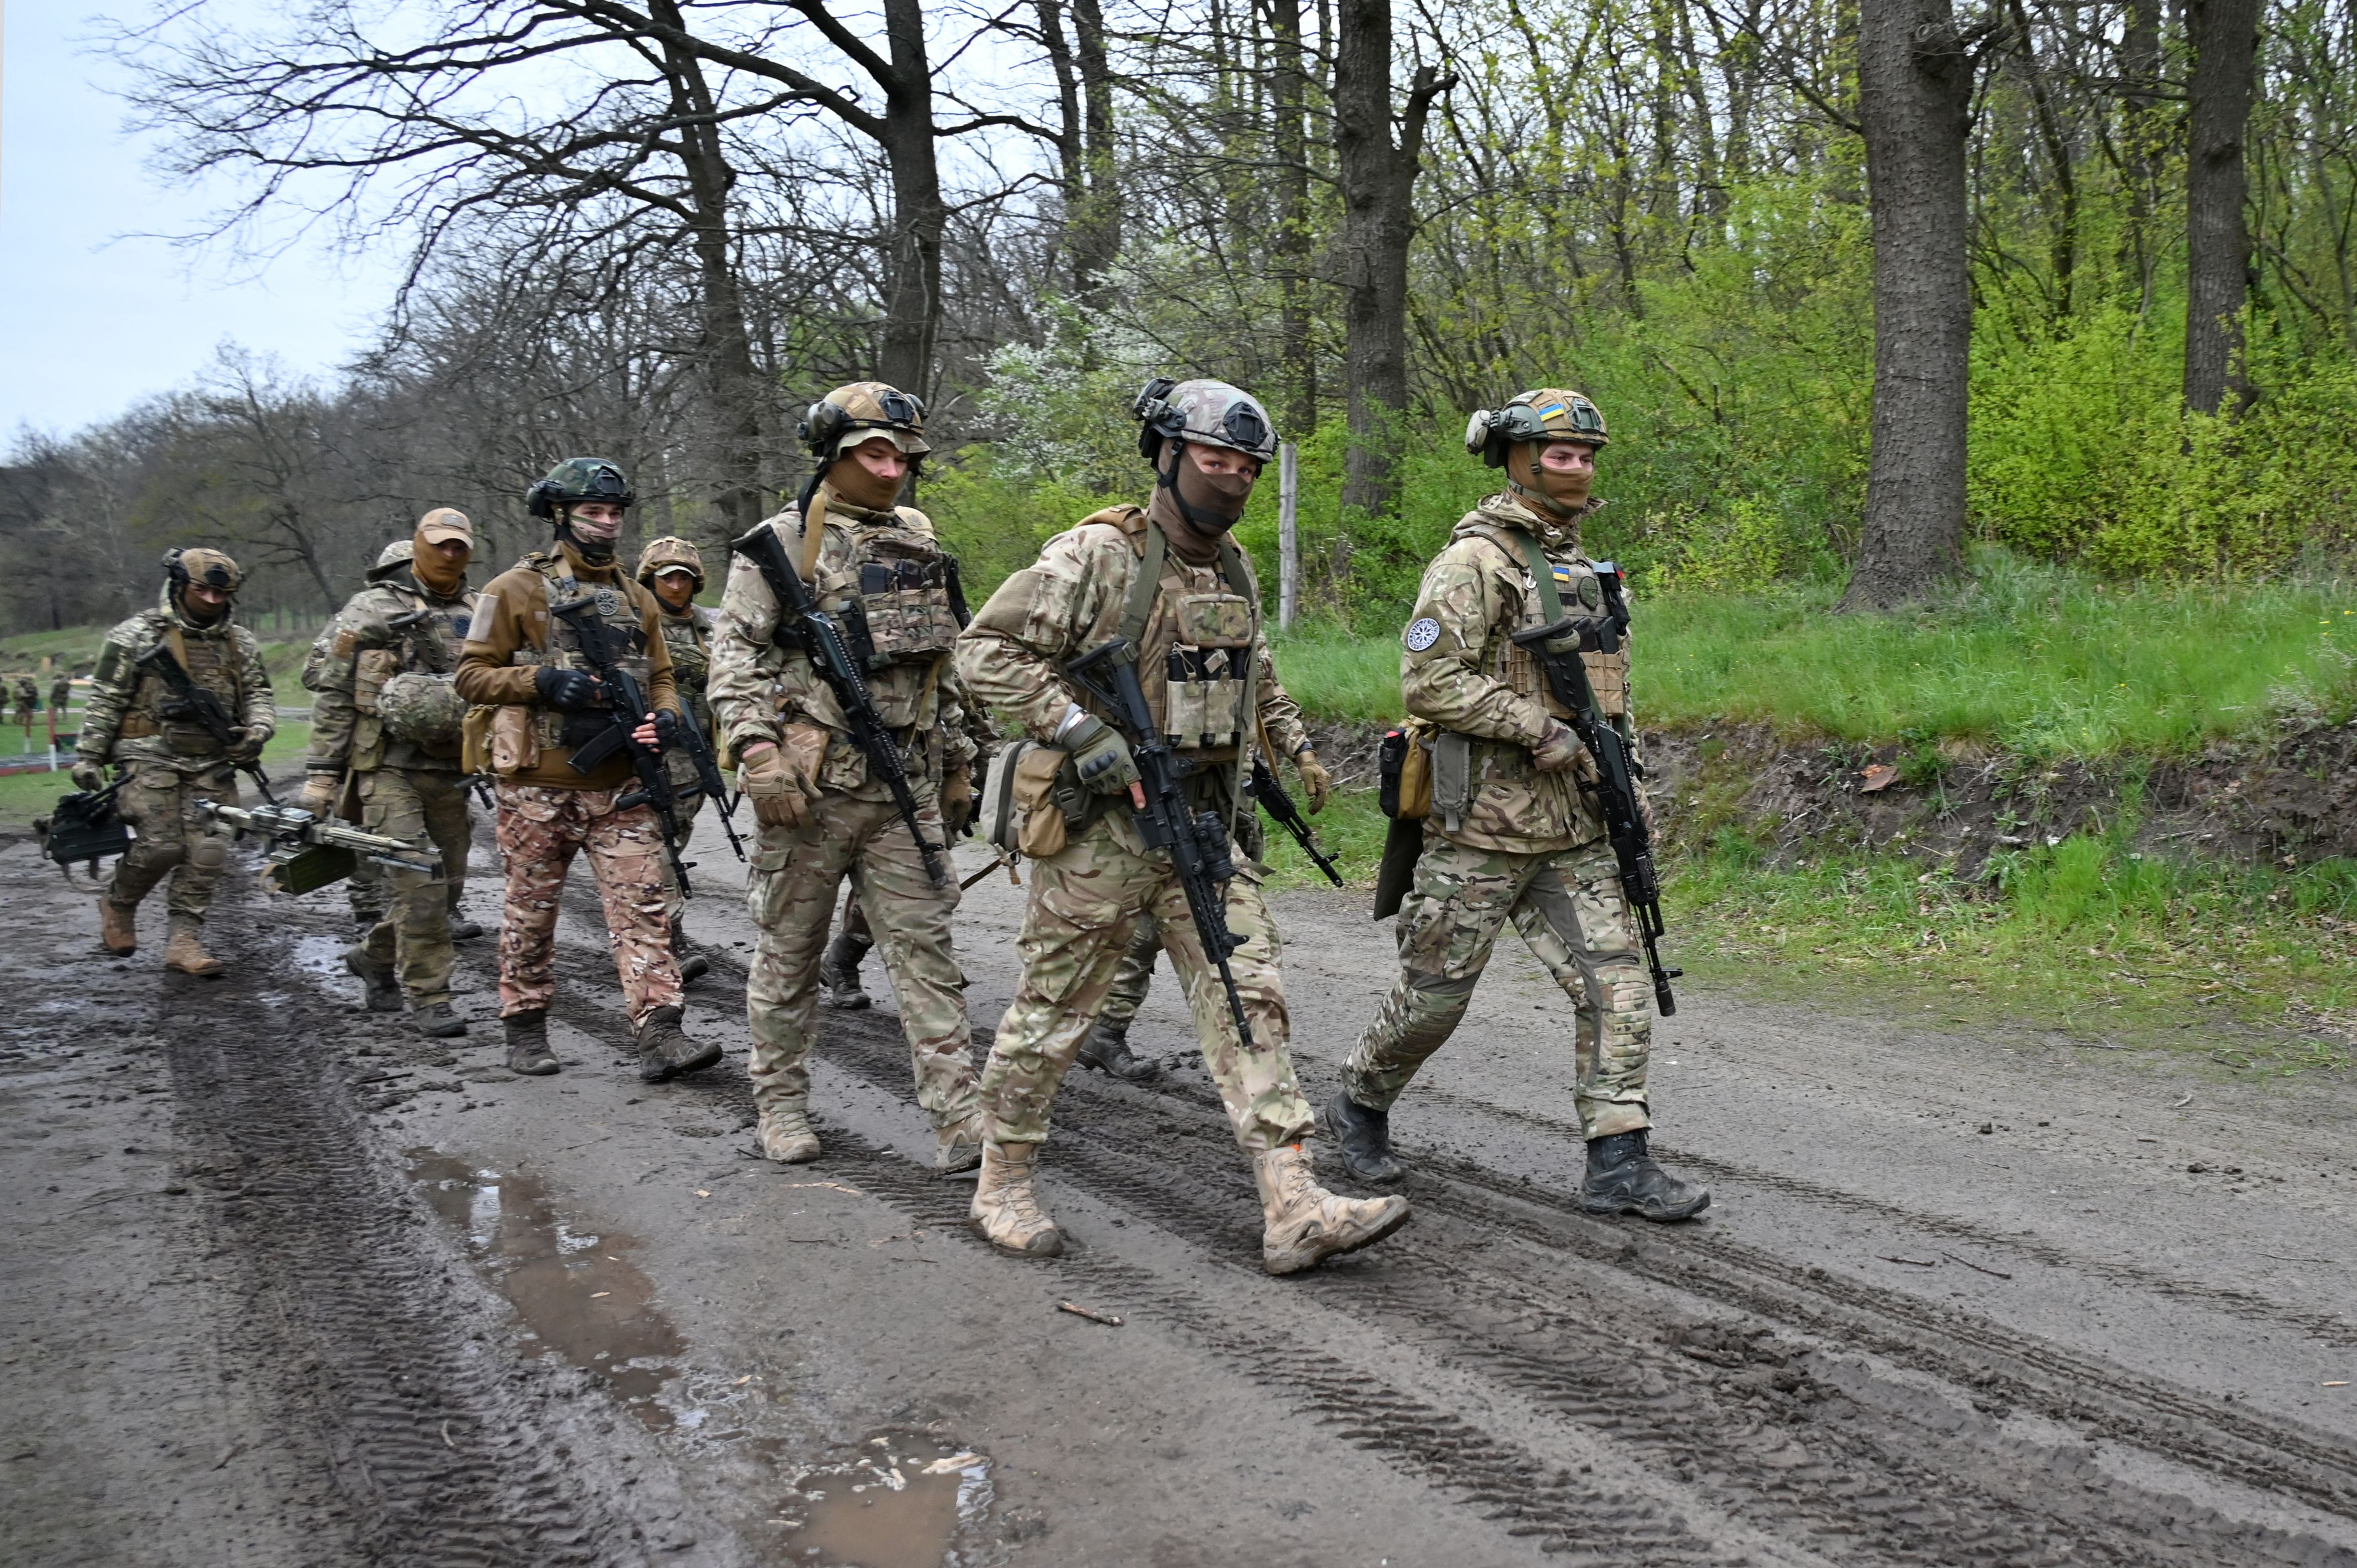 A group of soldiers in camouflage, helmets, and boots march down a muddy road, surrounded by trees.